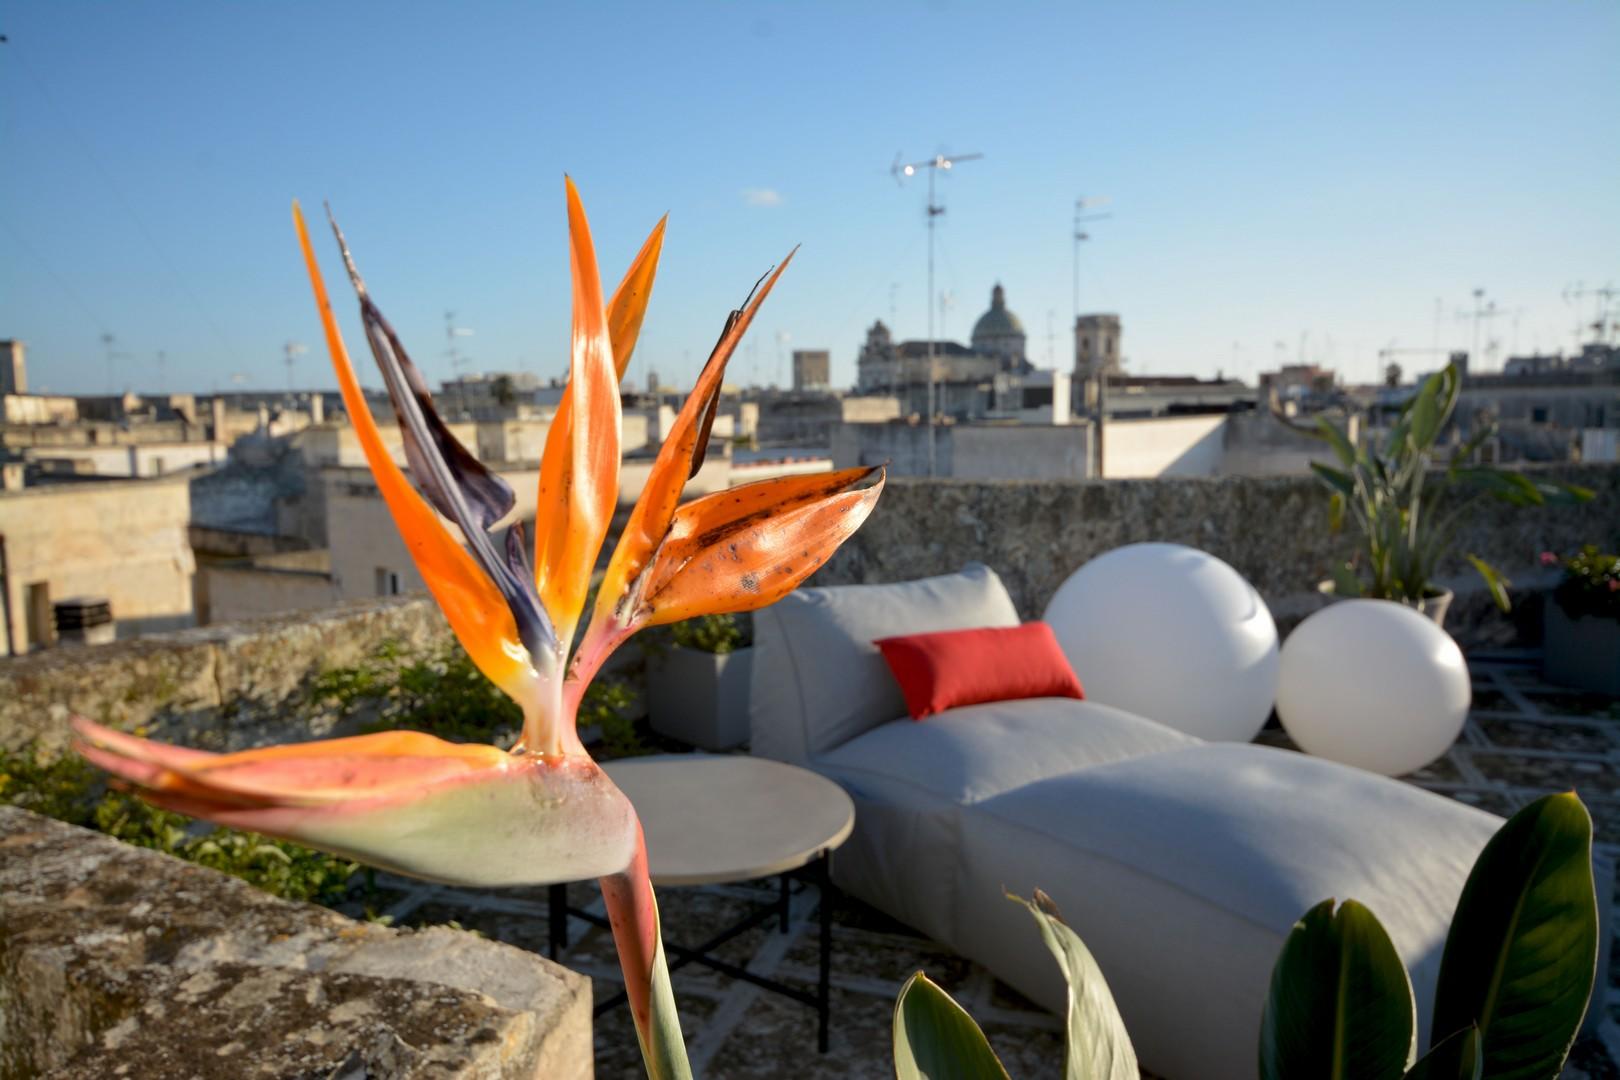 Roof top furnished terrace